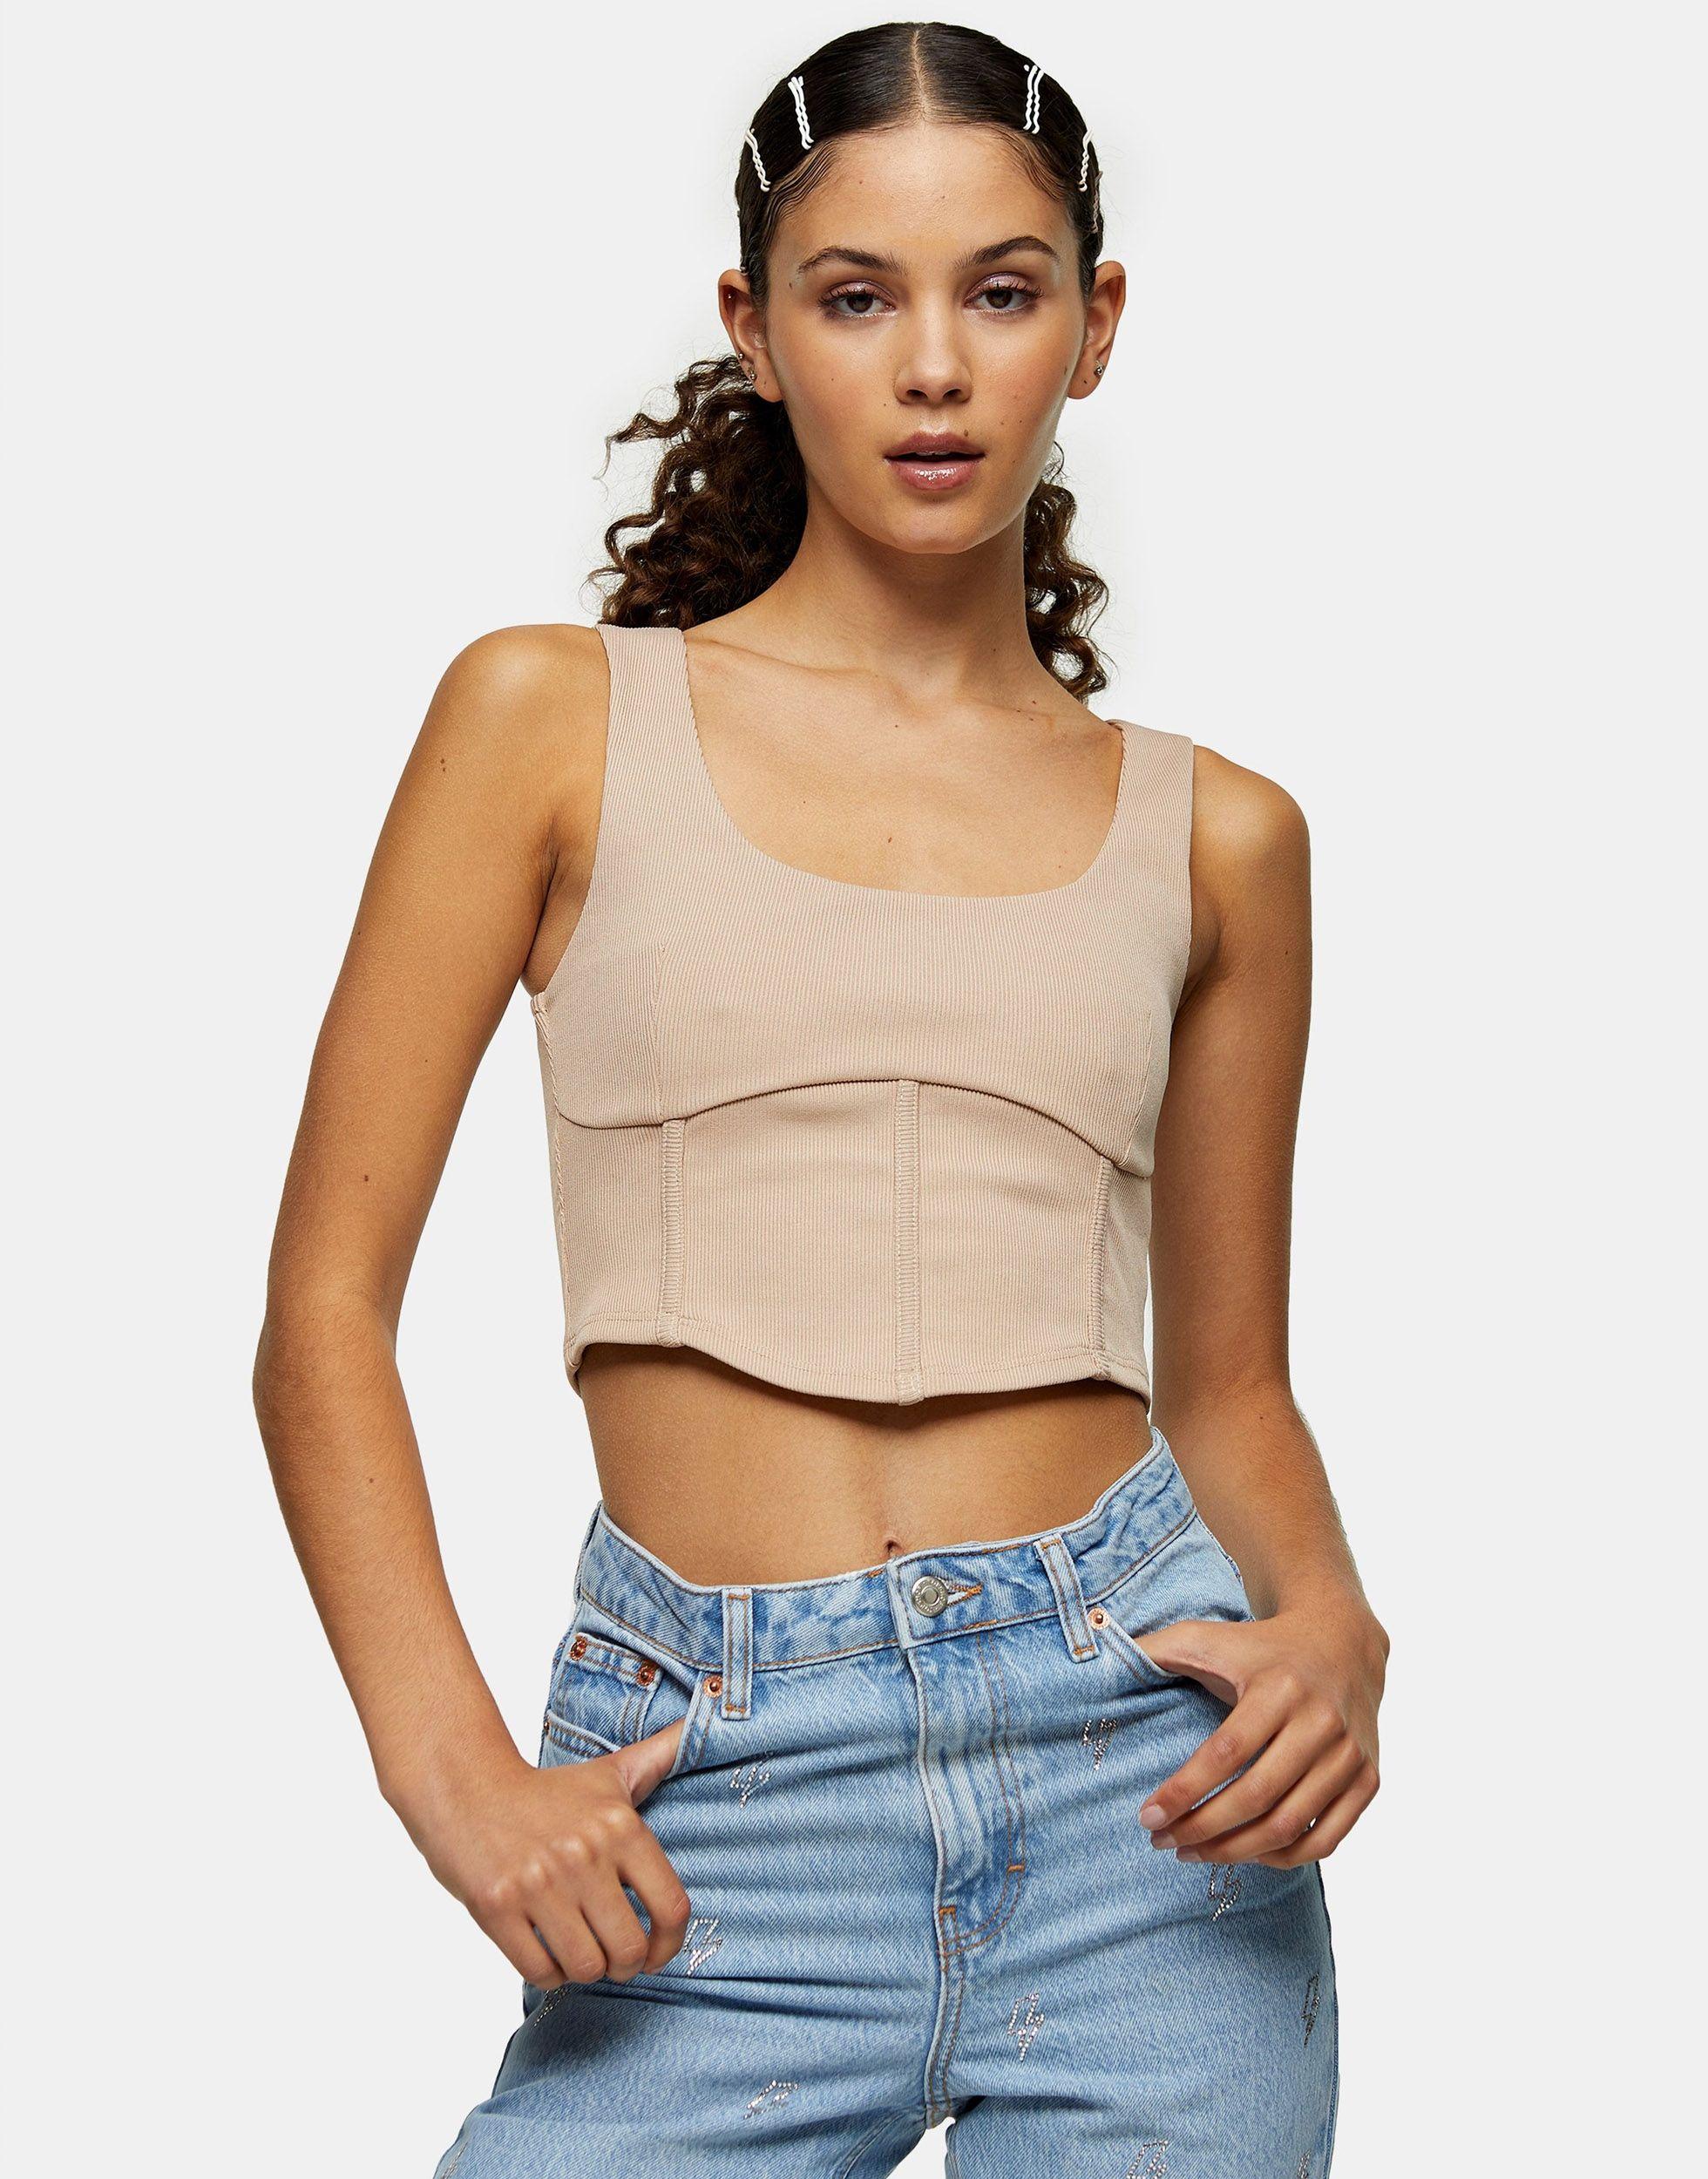 needle Bowling Lionel Green Street TOPSHOP Ribbed Corset Top in Brown | Lyst